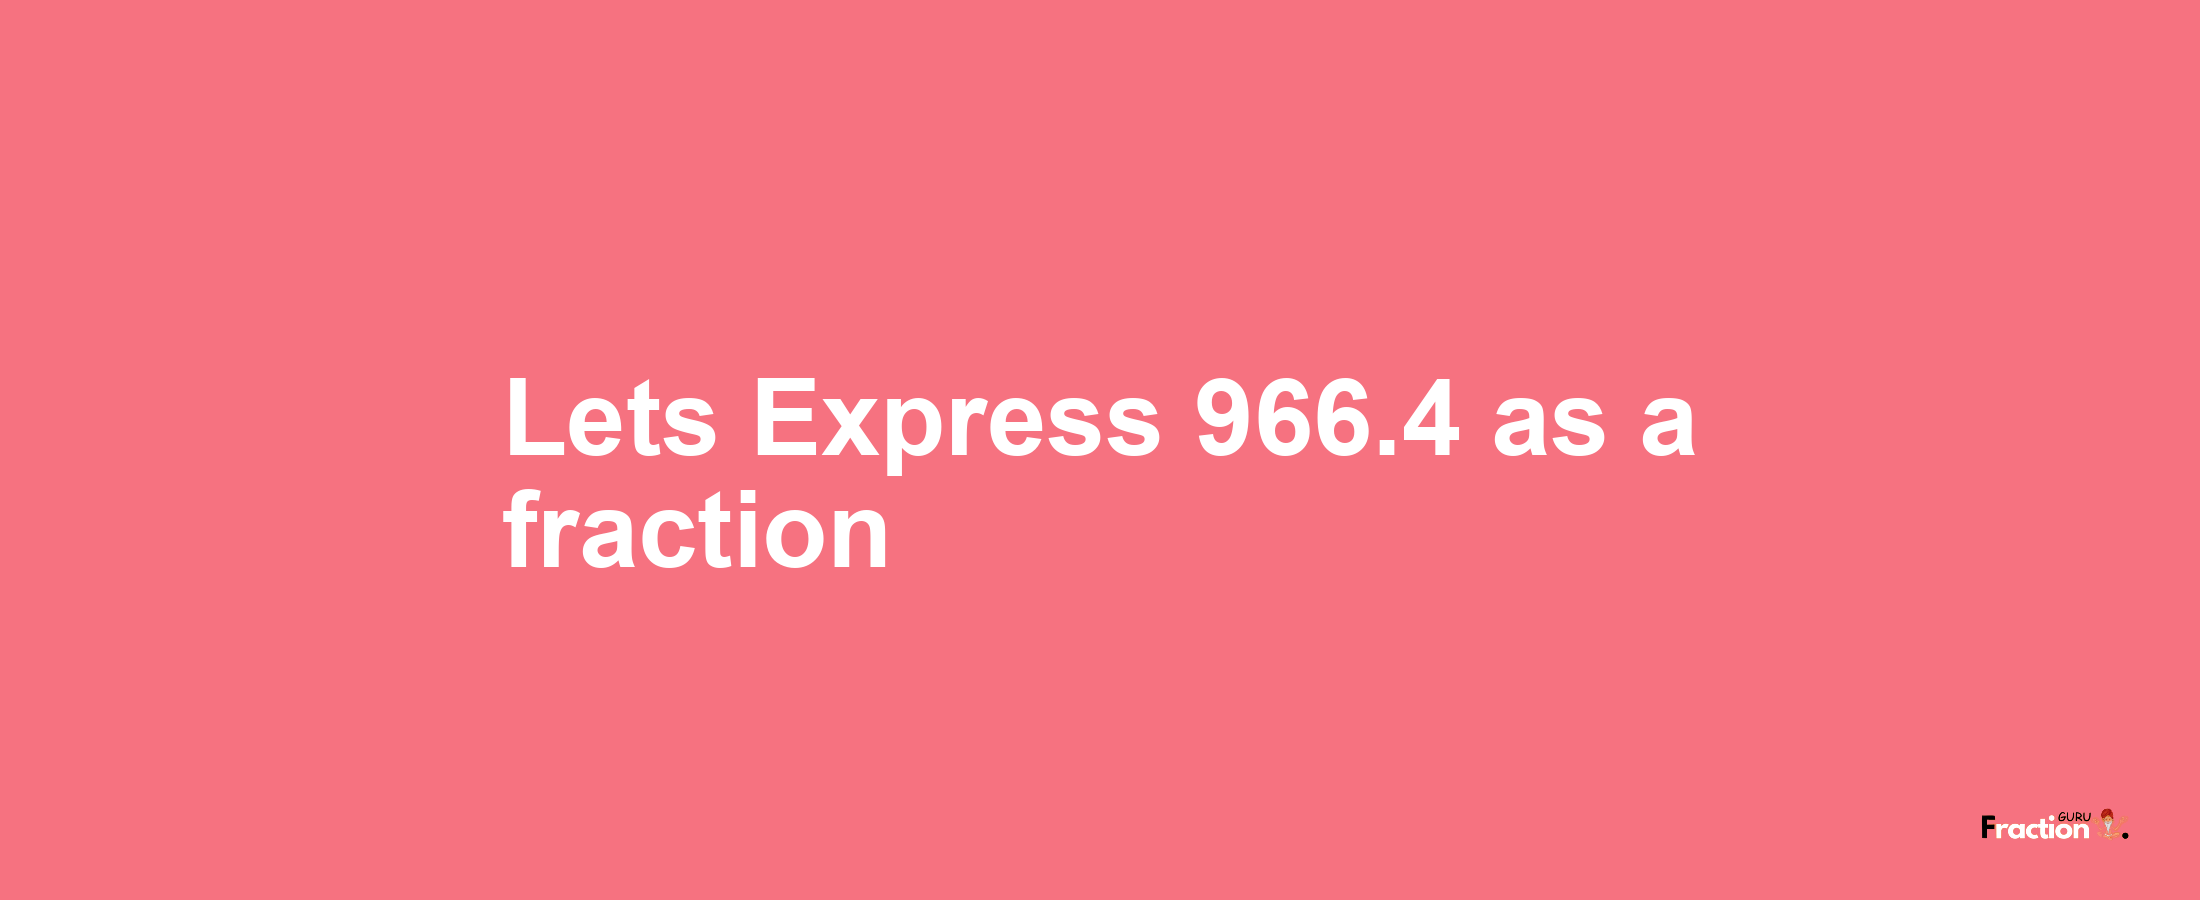 Lets Express 966.4 as afraction